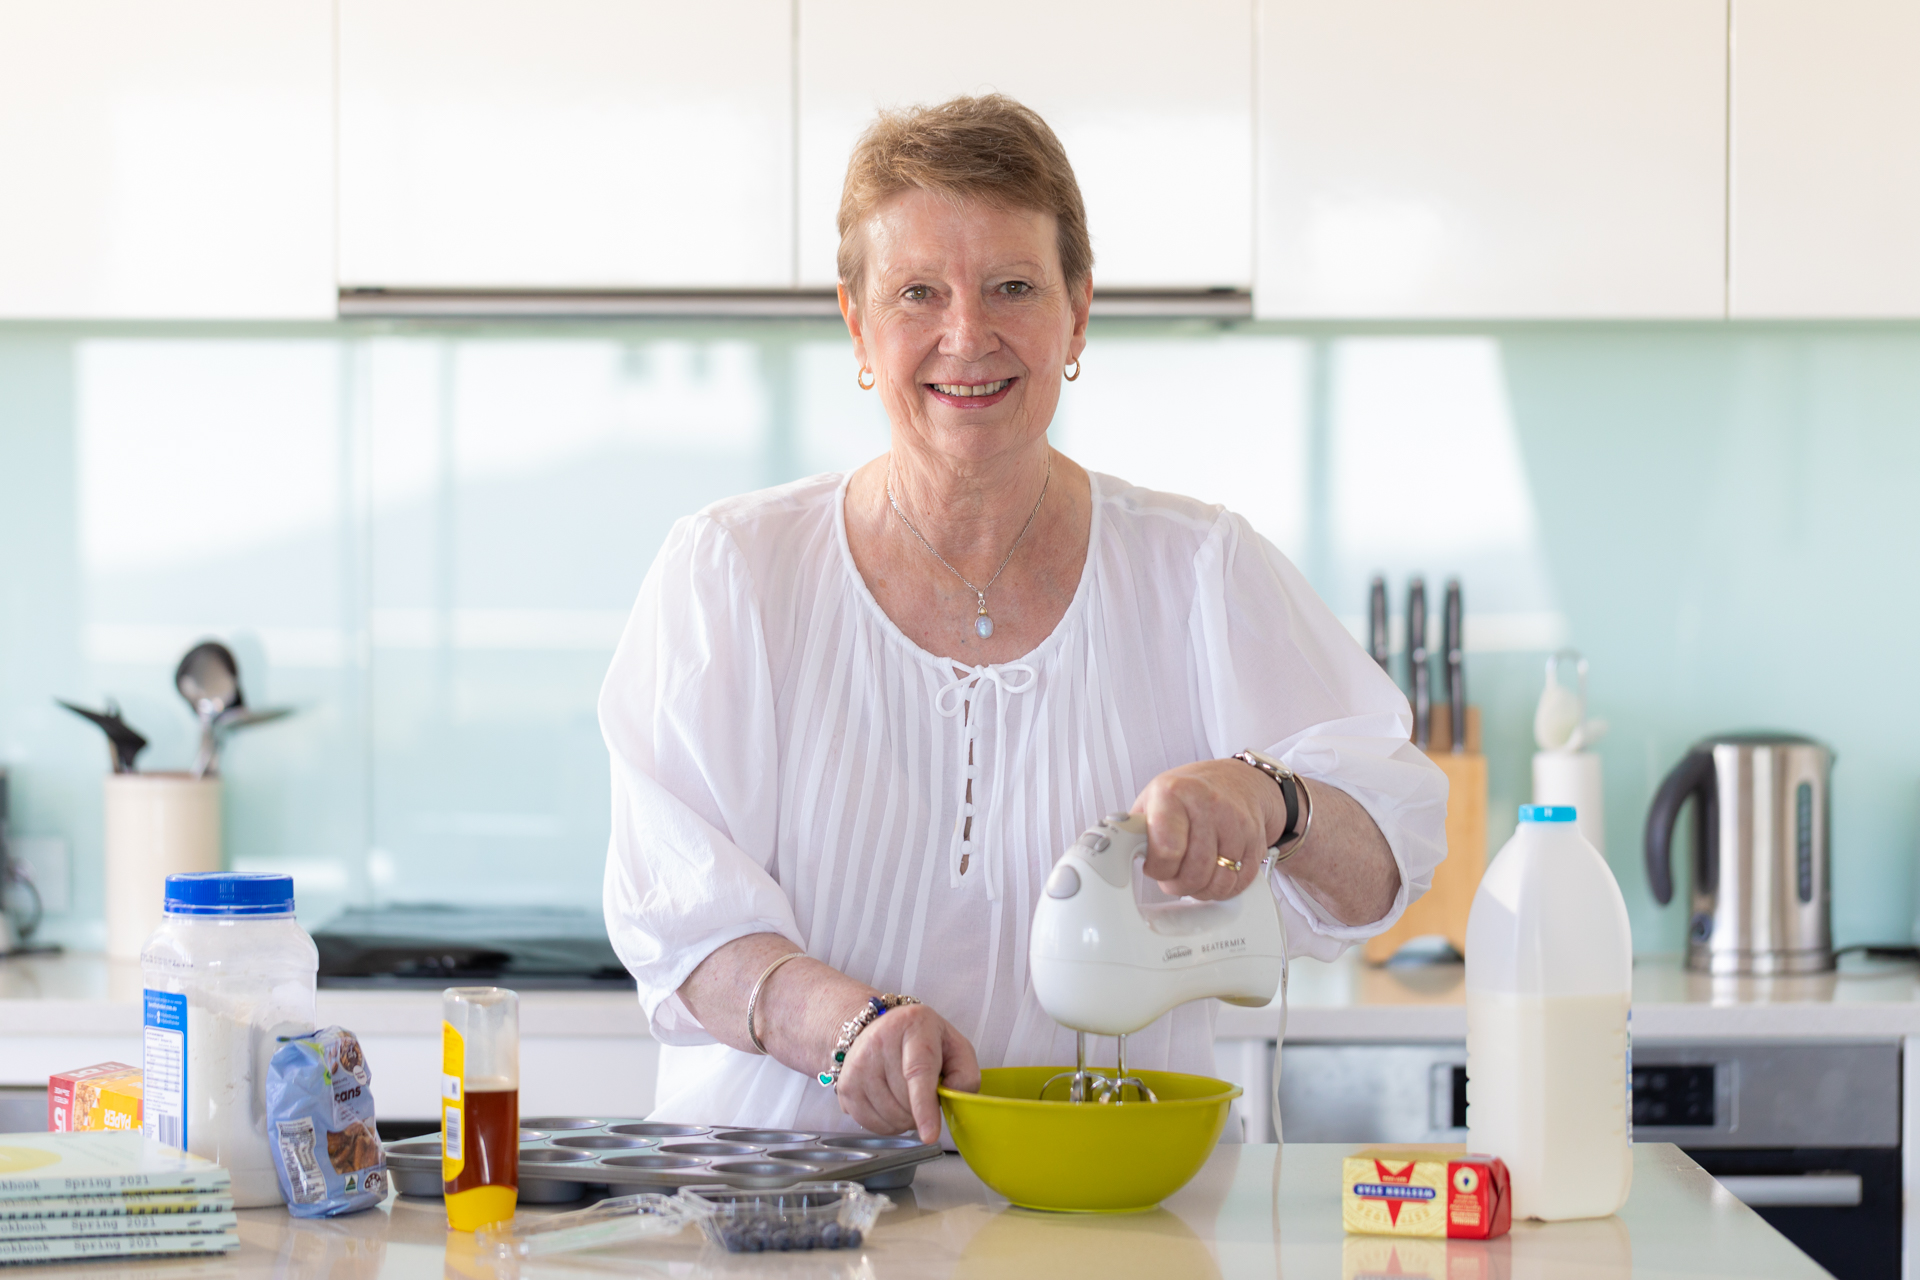 Meet the Canberra community that survived lockdown by creating a cookbook